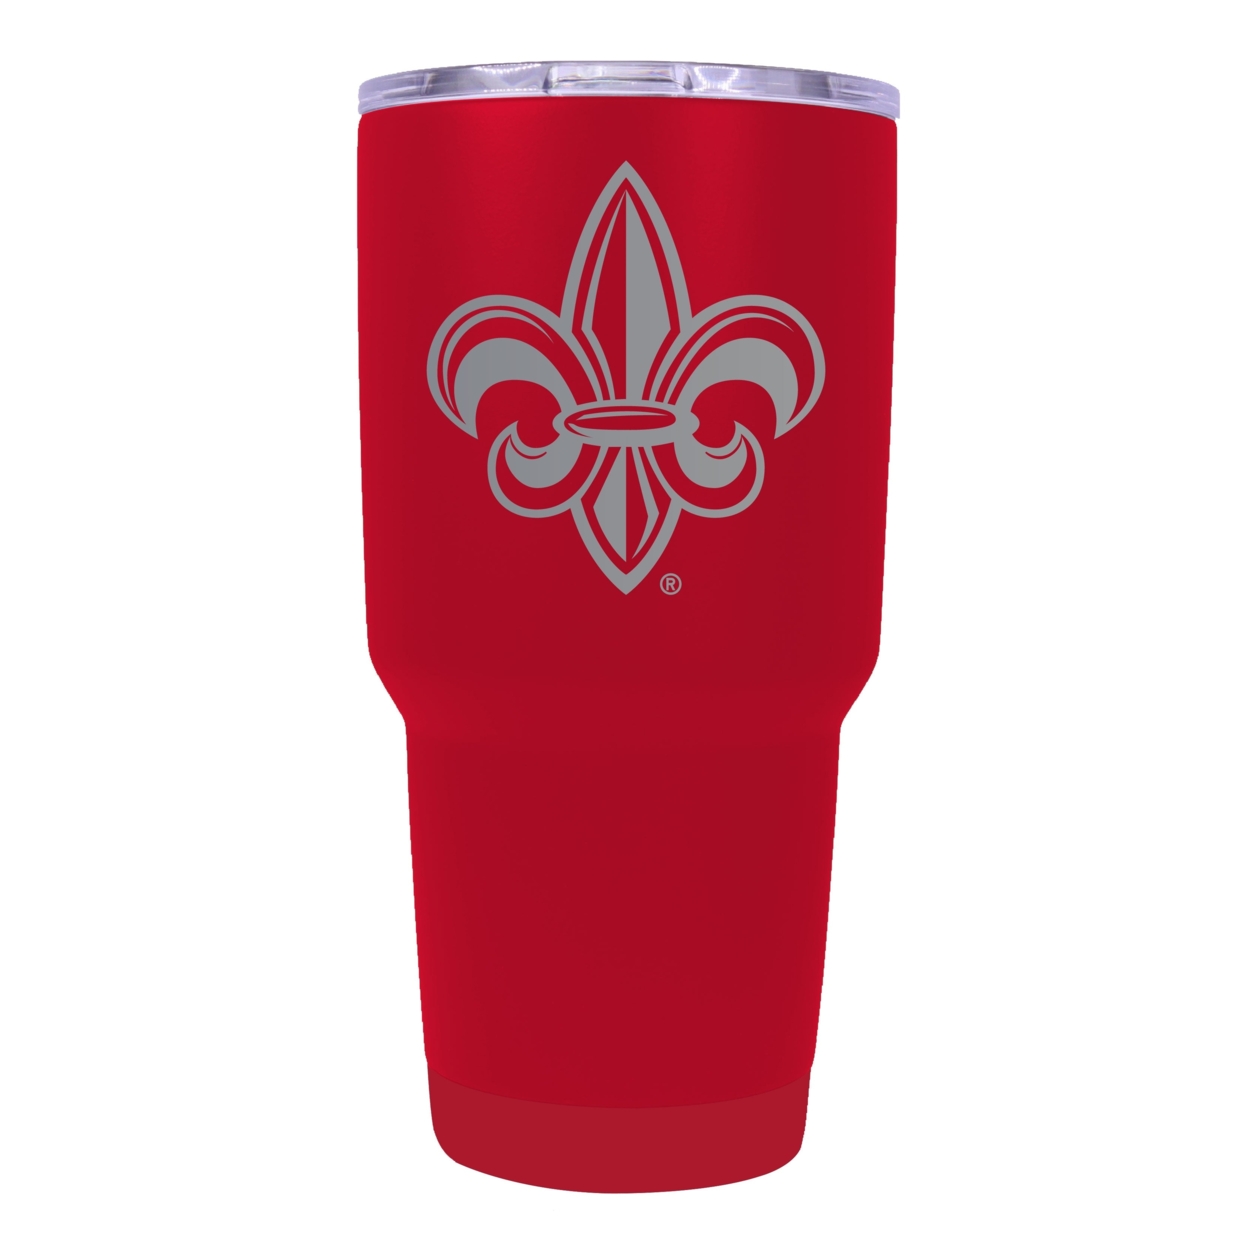 Louisiana At Lafayette 24 Oz Laser Engraved Stainless Steel Insulated Tumbler - Choose Your Color. - Seafoam